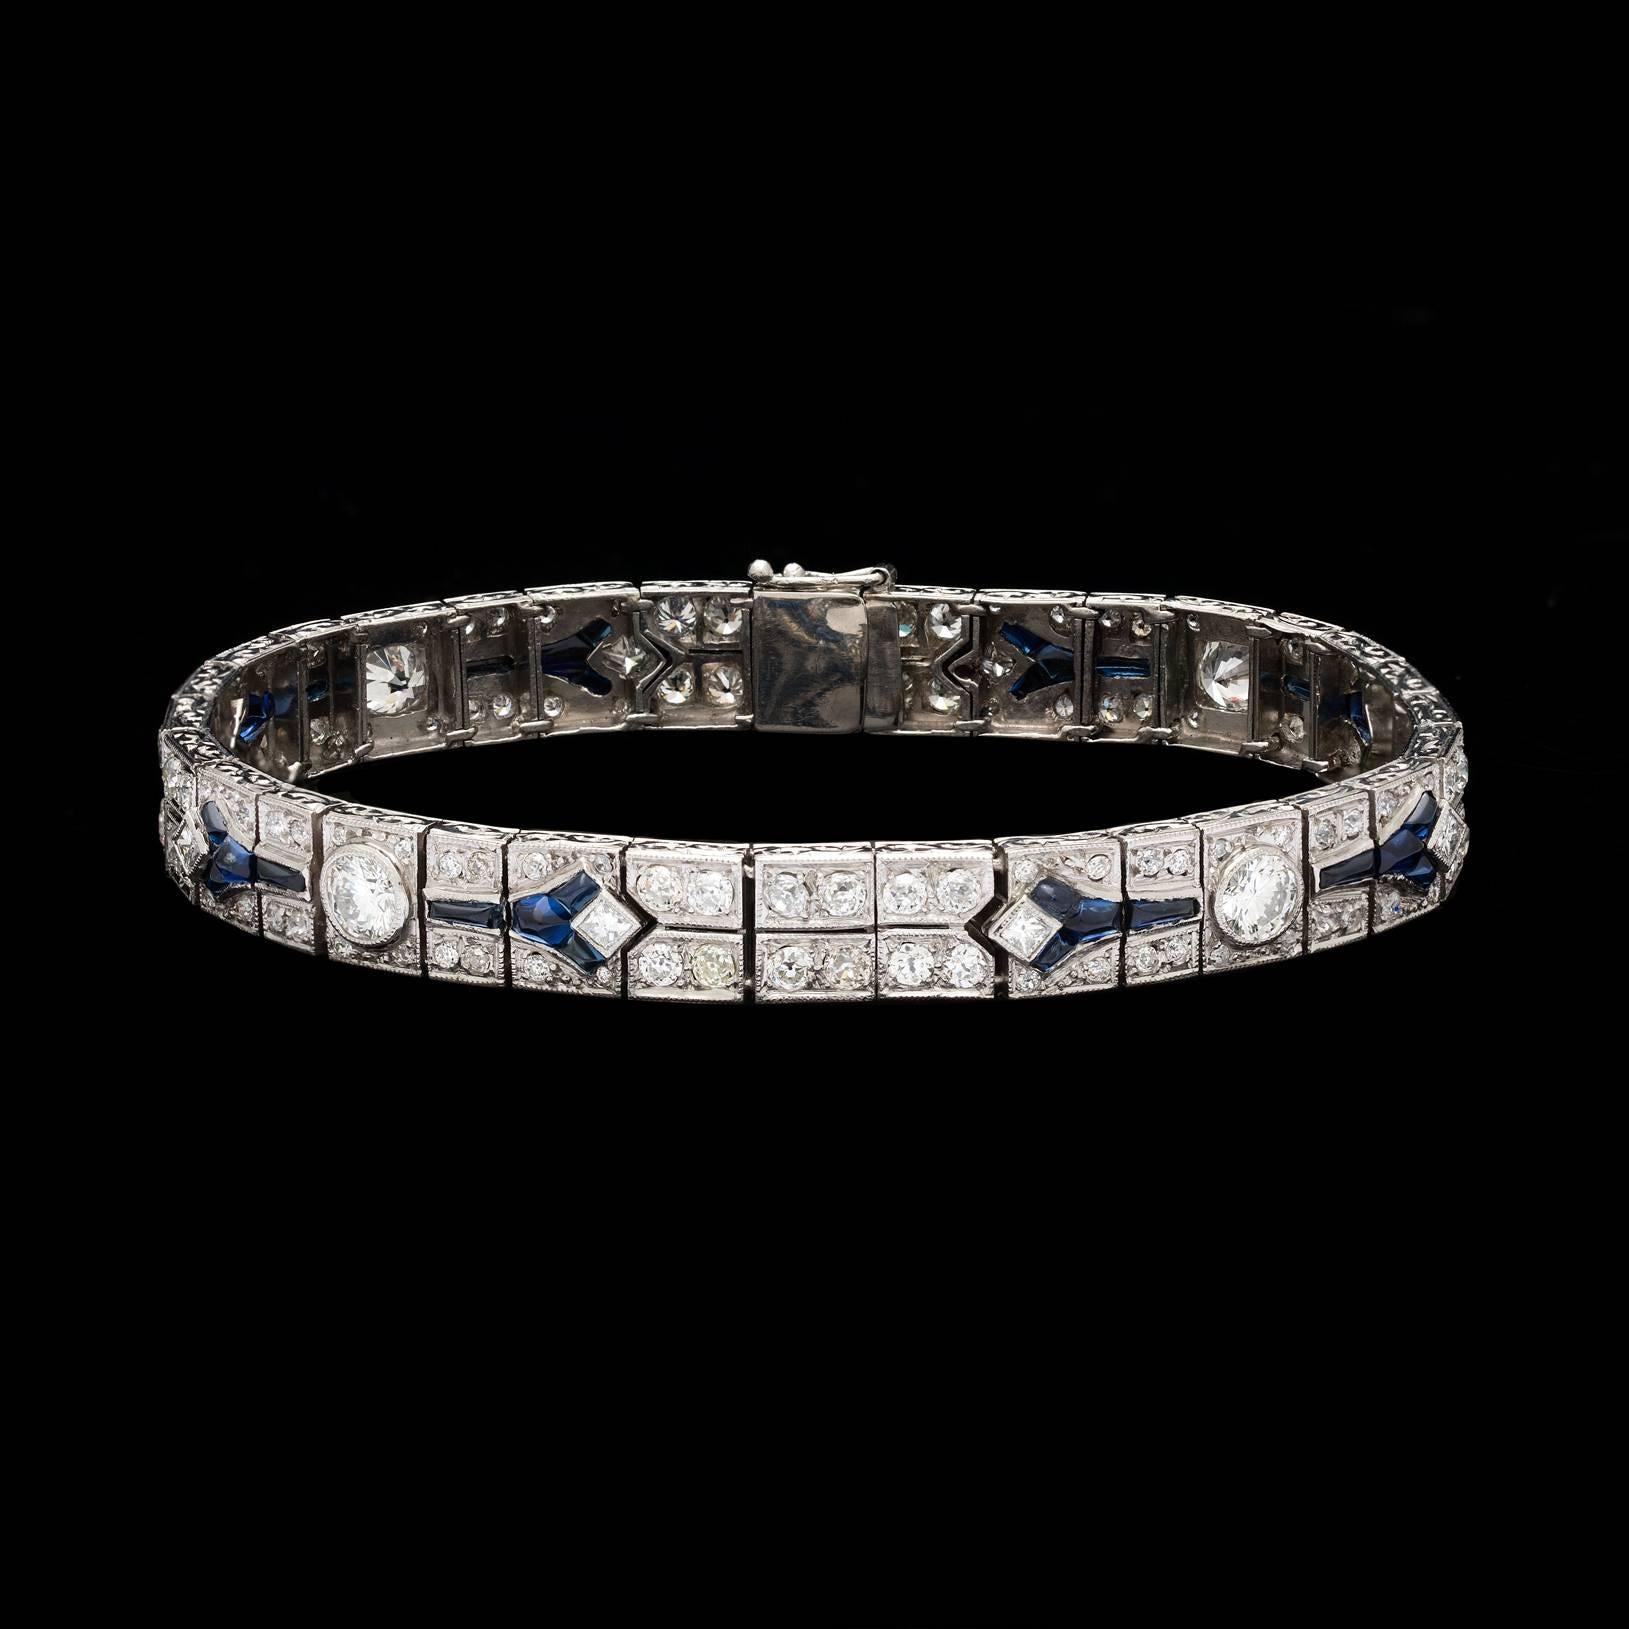 Platinum Art Deco Bracelet features a mix of old european, princess, & modern brilliant cut diamonds totaling 6.92 carats. Accenting the bracelet are calibre cut cabochon blue sapphires. The bracelet measures 7.5″ in length and 8.3mm in width. Total